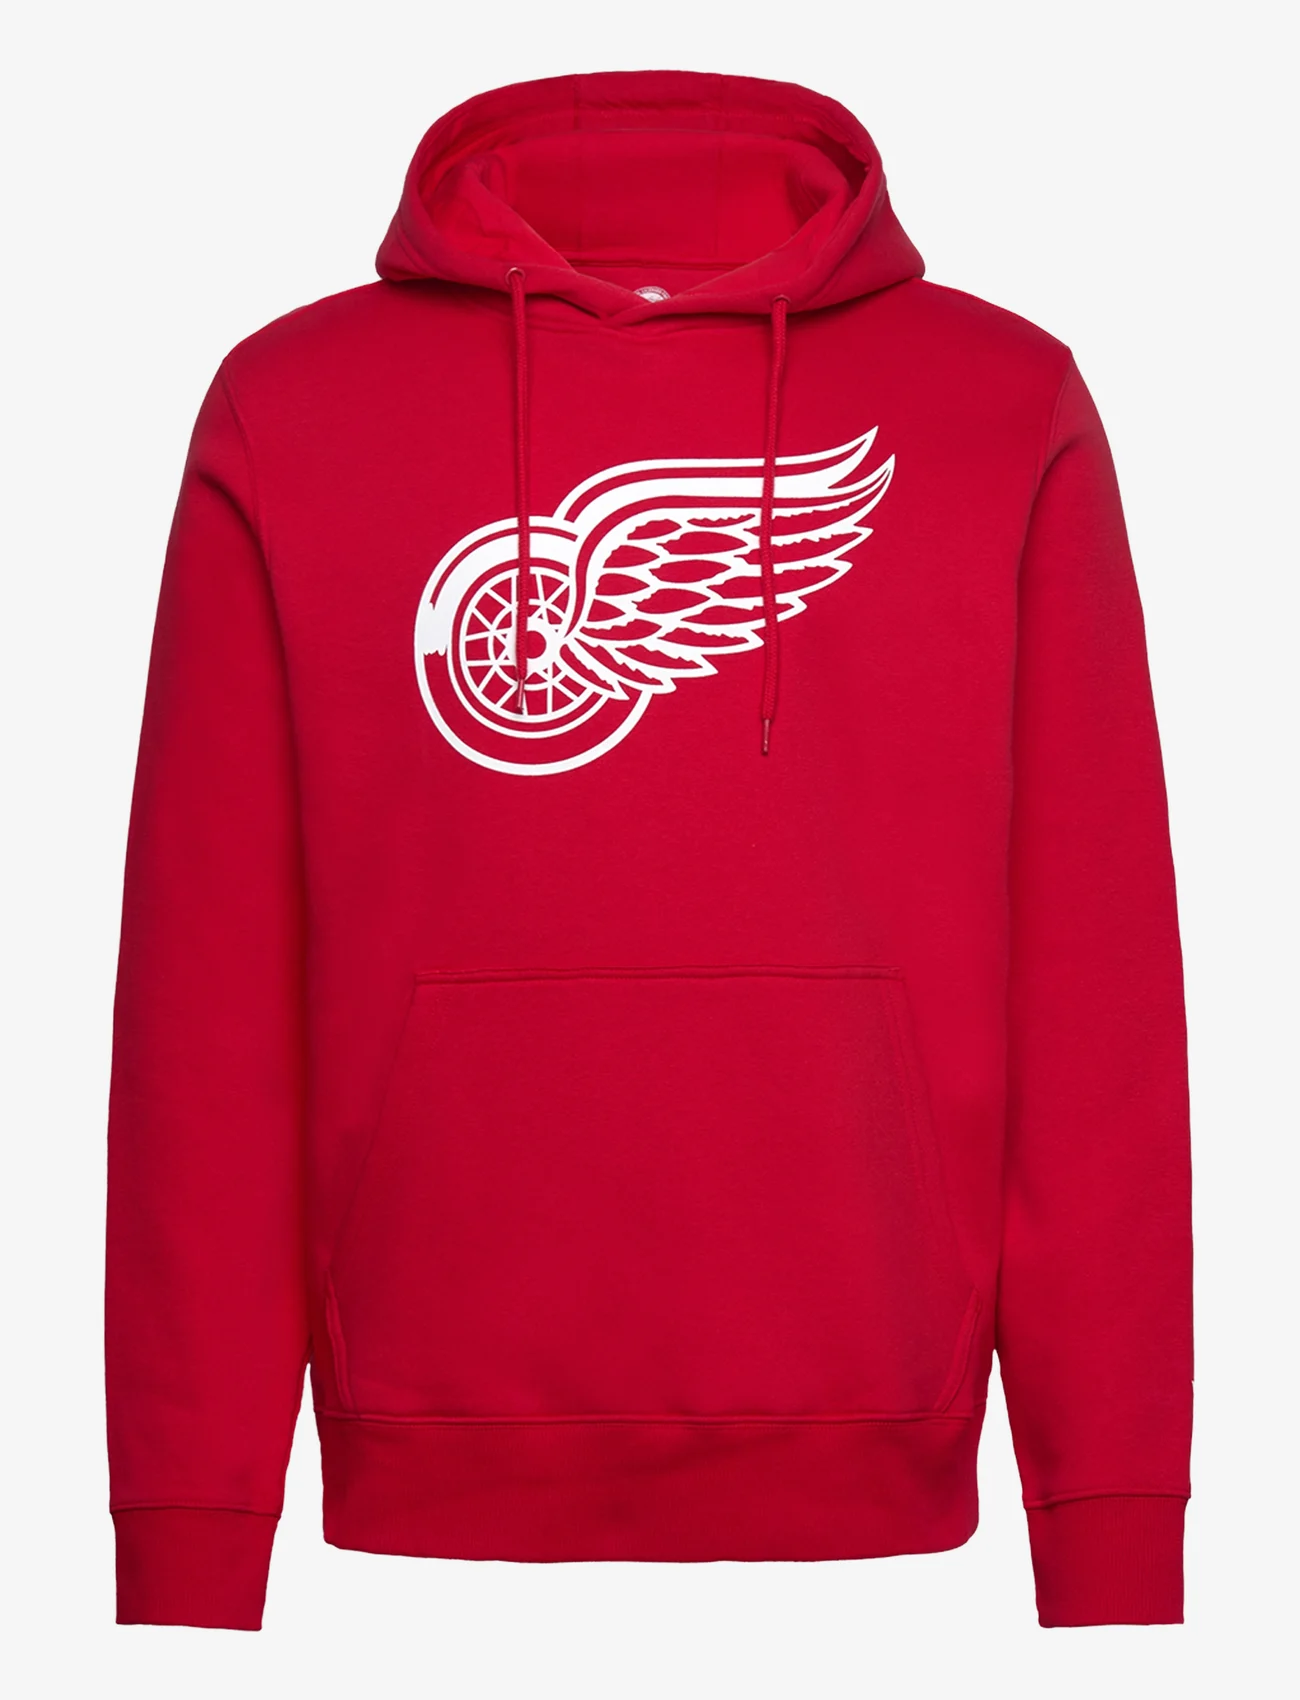 Fanatics - Detroit Red Wings Primary Logo Graphic Hoodie - hoodies - athletic red - 0